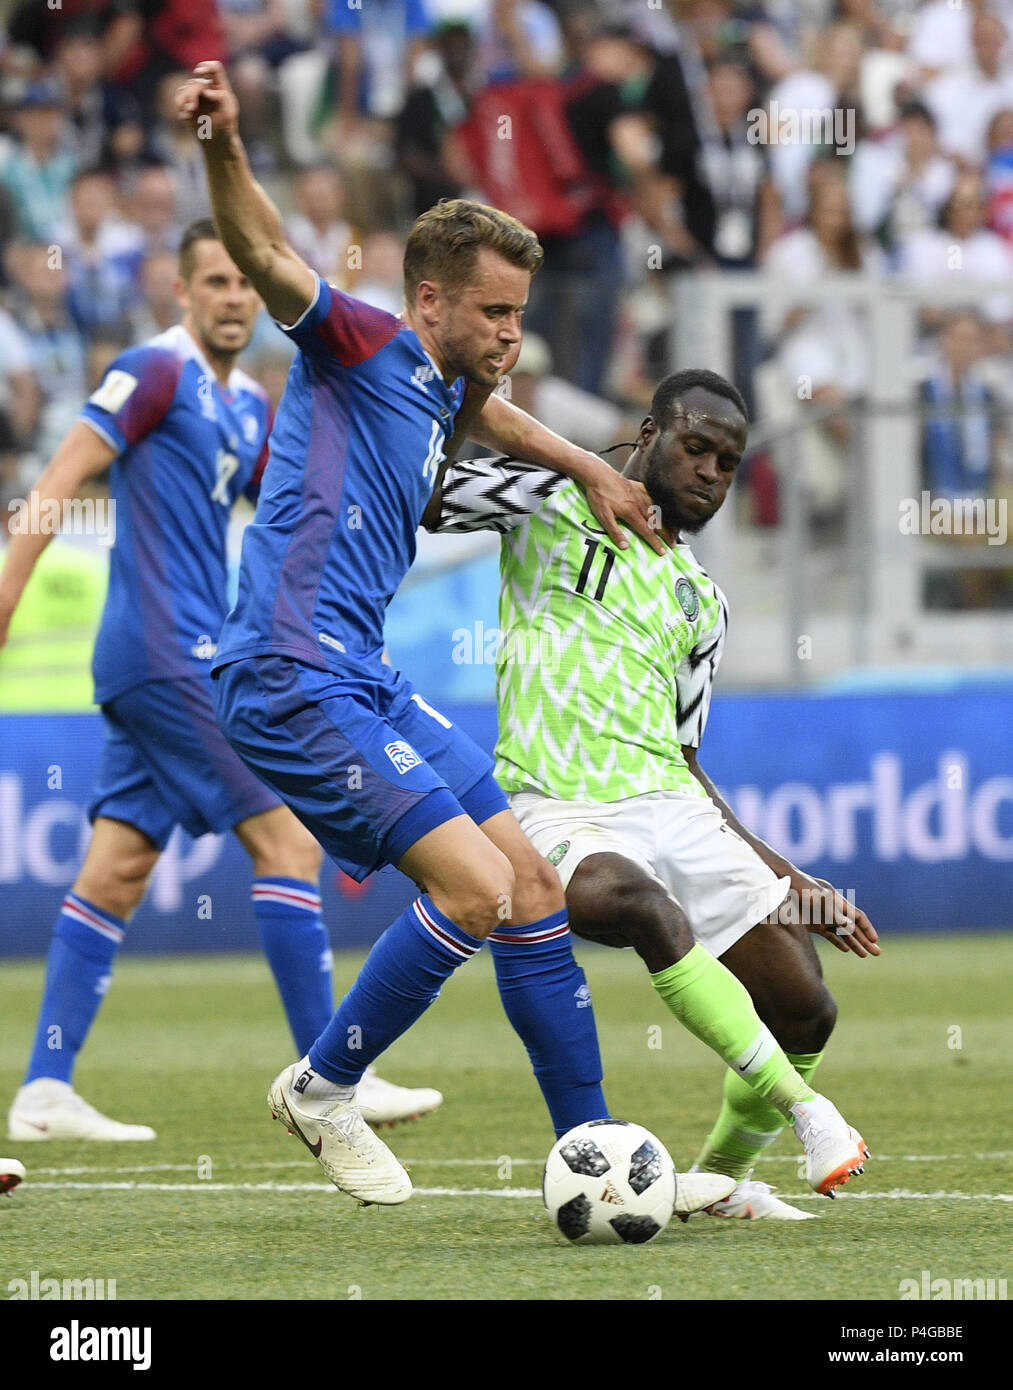 Volgograd, Russia. 22nd June, 2018. Kari Arnason (L) of Iceland vies with Victor Moses of Nigeria during the 2018 FIFA World Cup Group D match between Nigeria and Iceland in Volgograd, Russia, June 22, 2018. Nigeria won 2-0. Credit: Lui Siu Wai/Xinhua/Alamy Live News Stock Photo